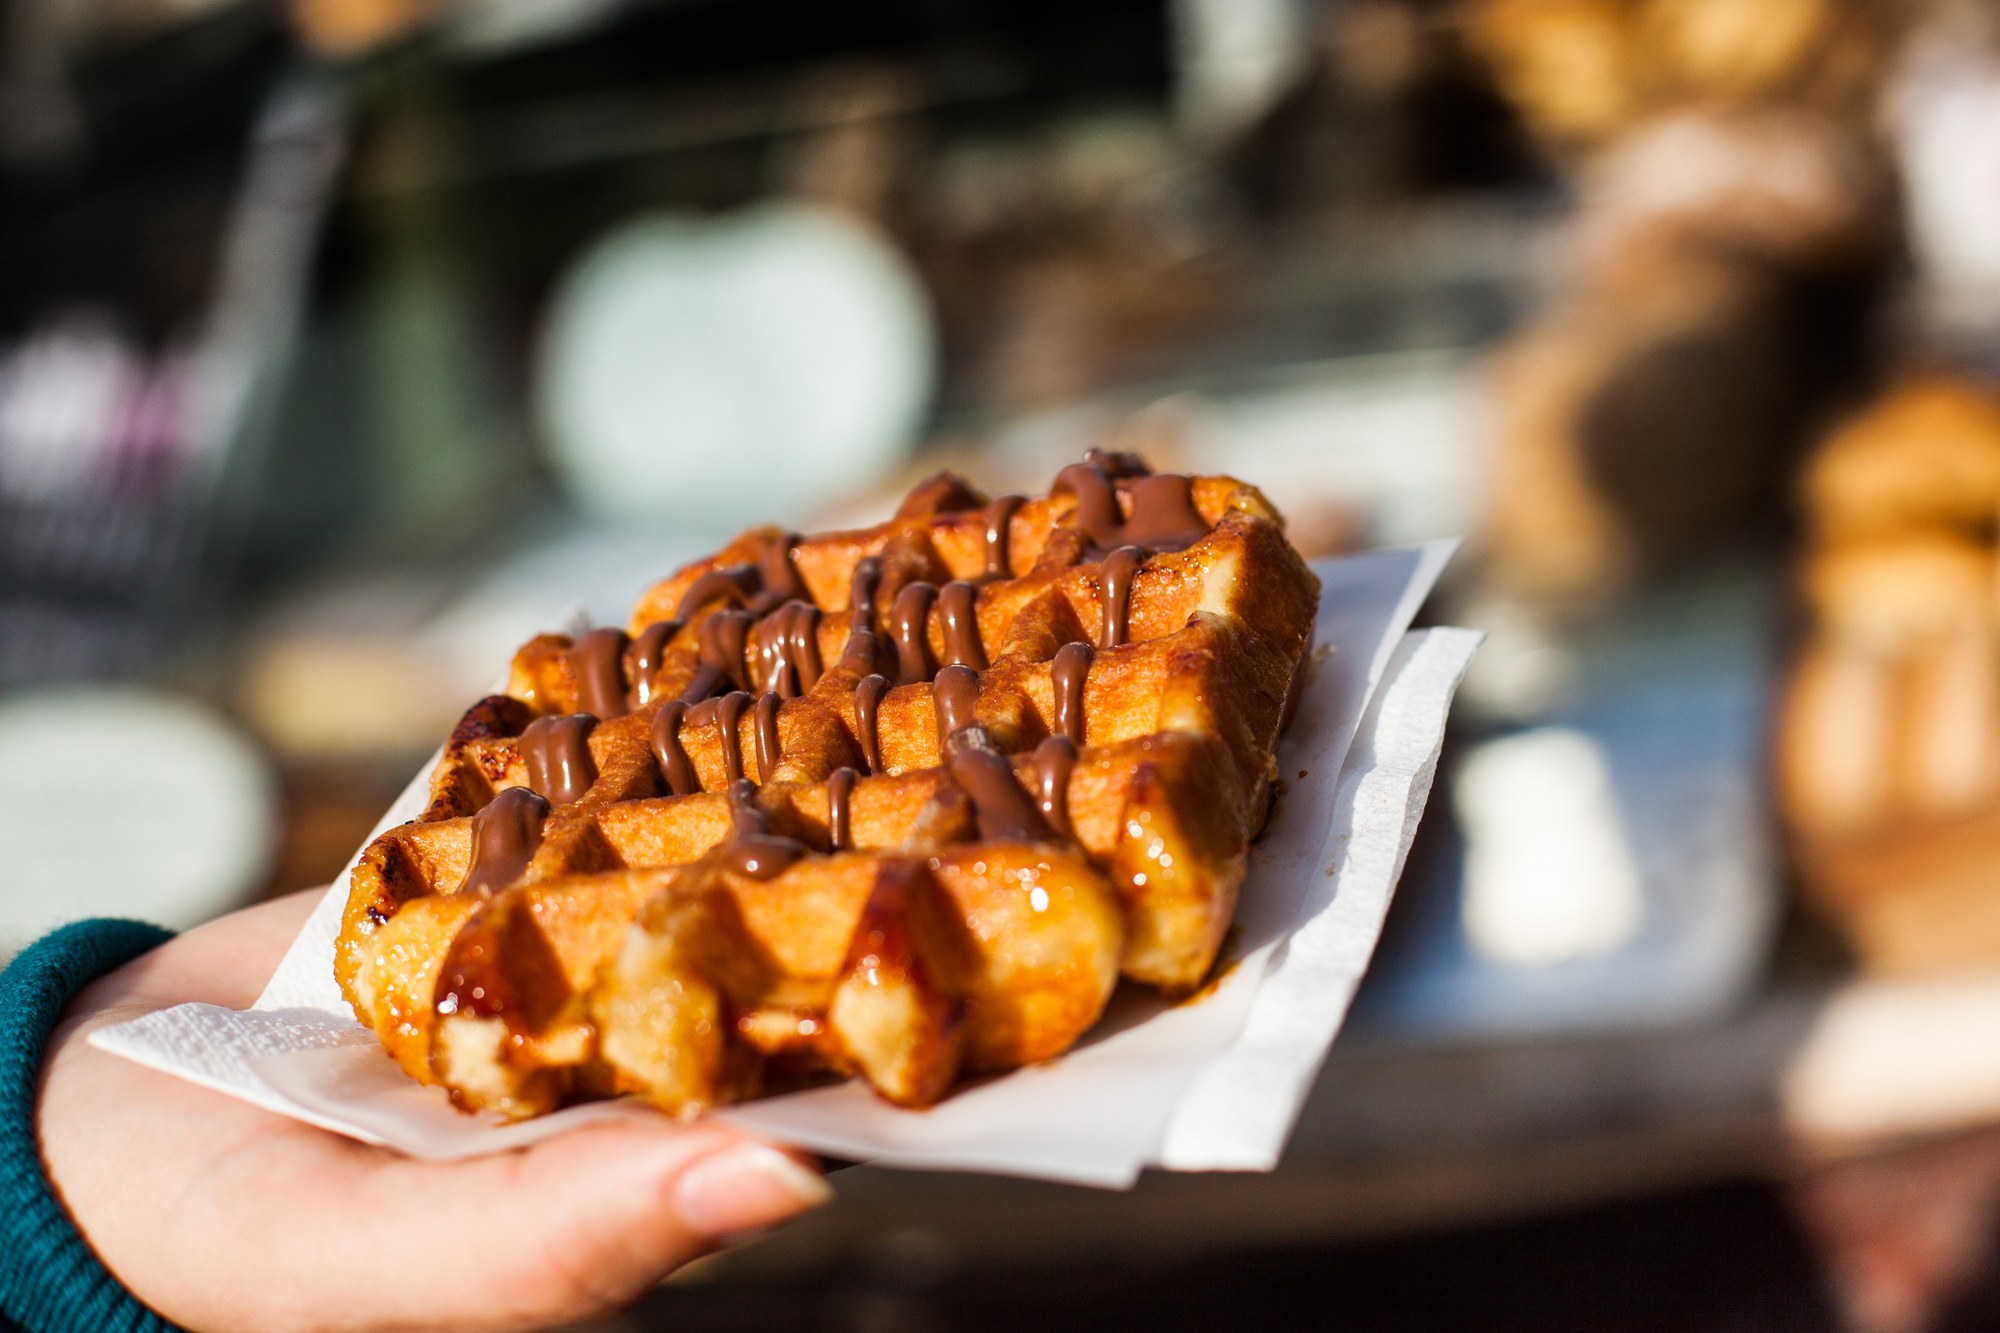 Waffles are a must-try street food in Ghent, Belgium